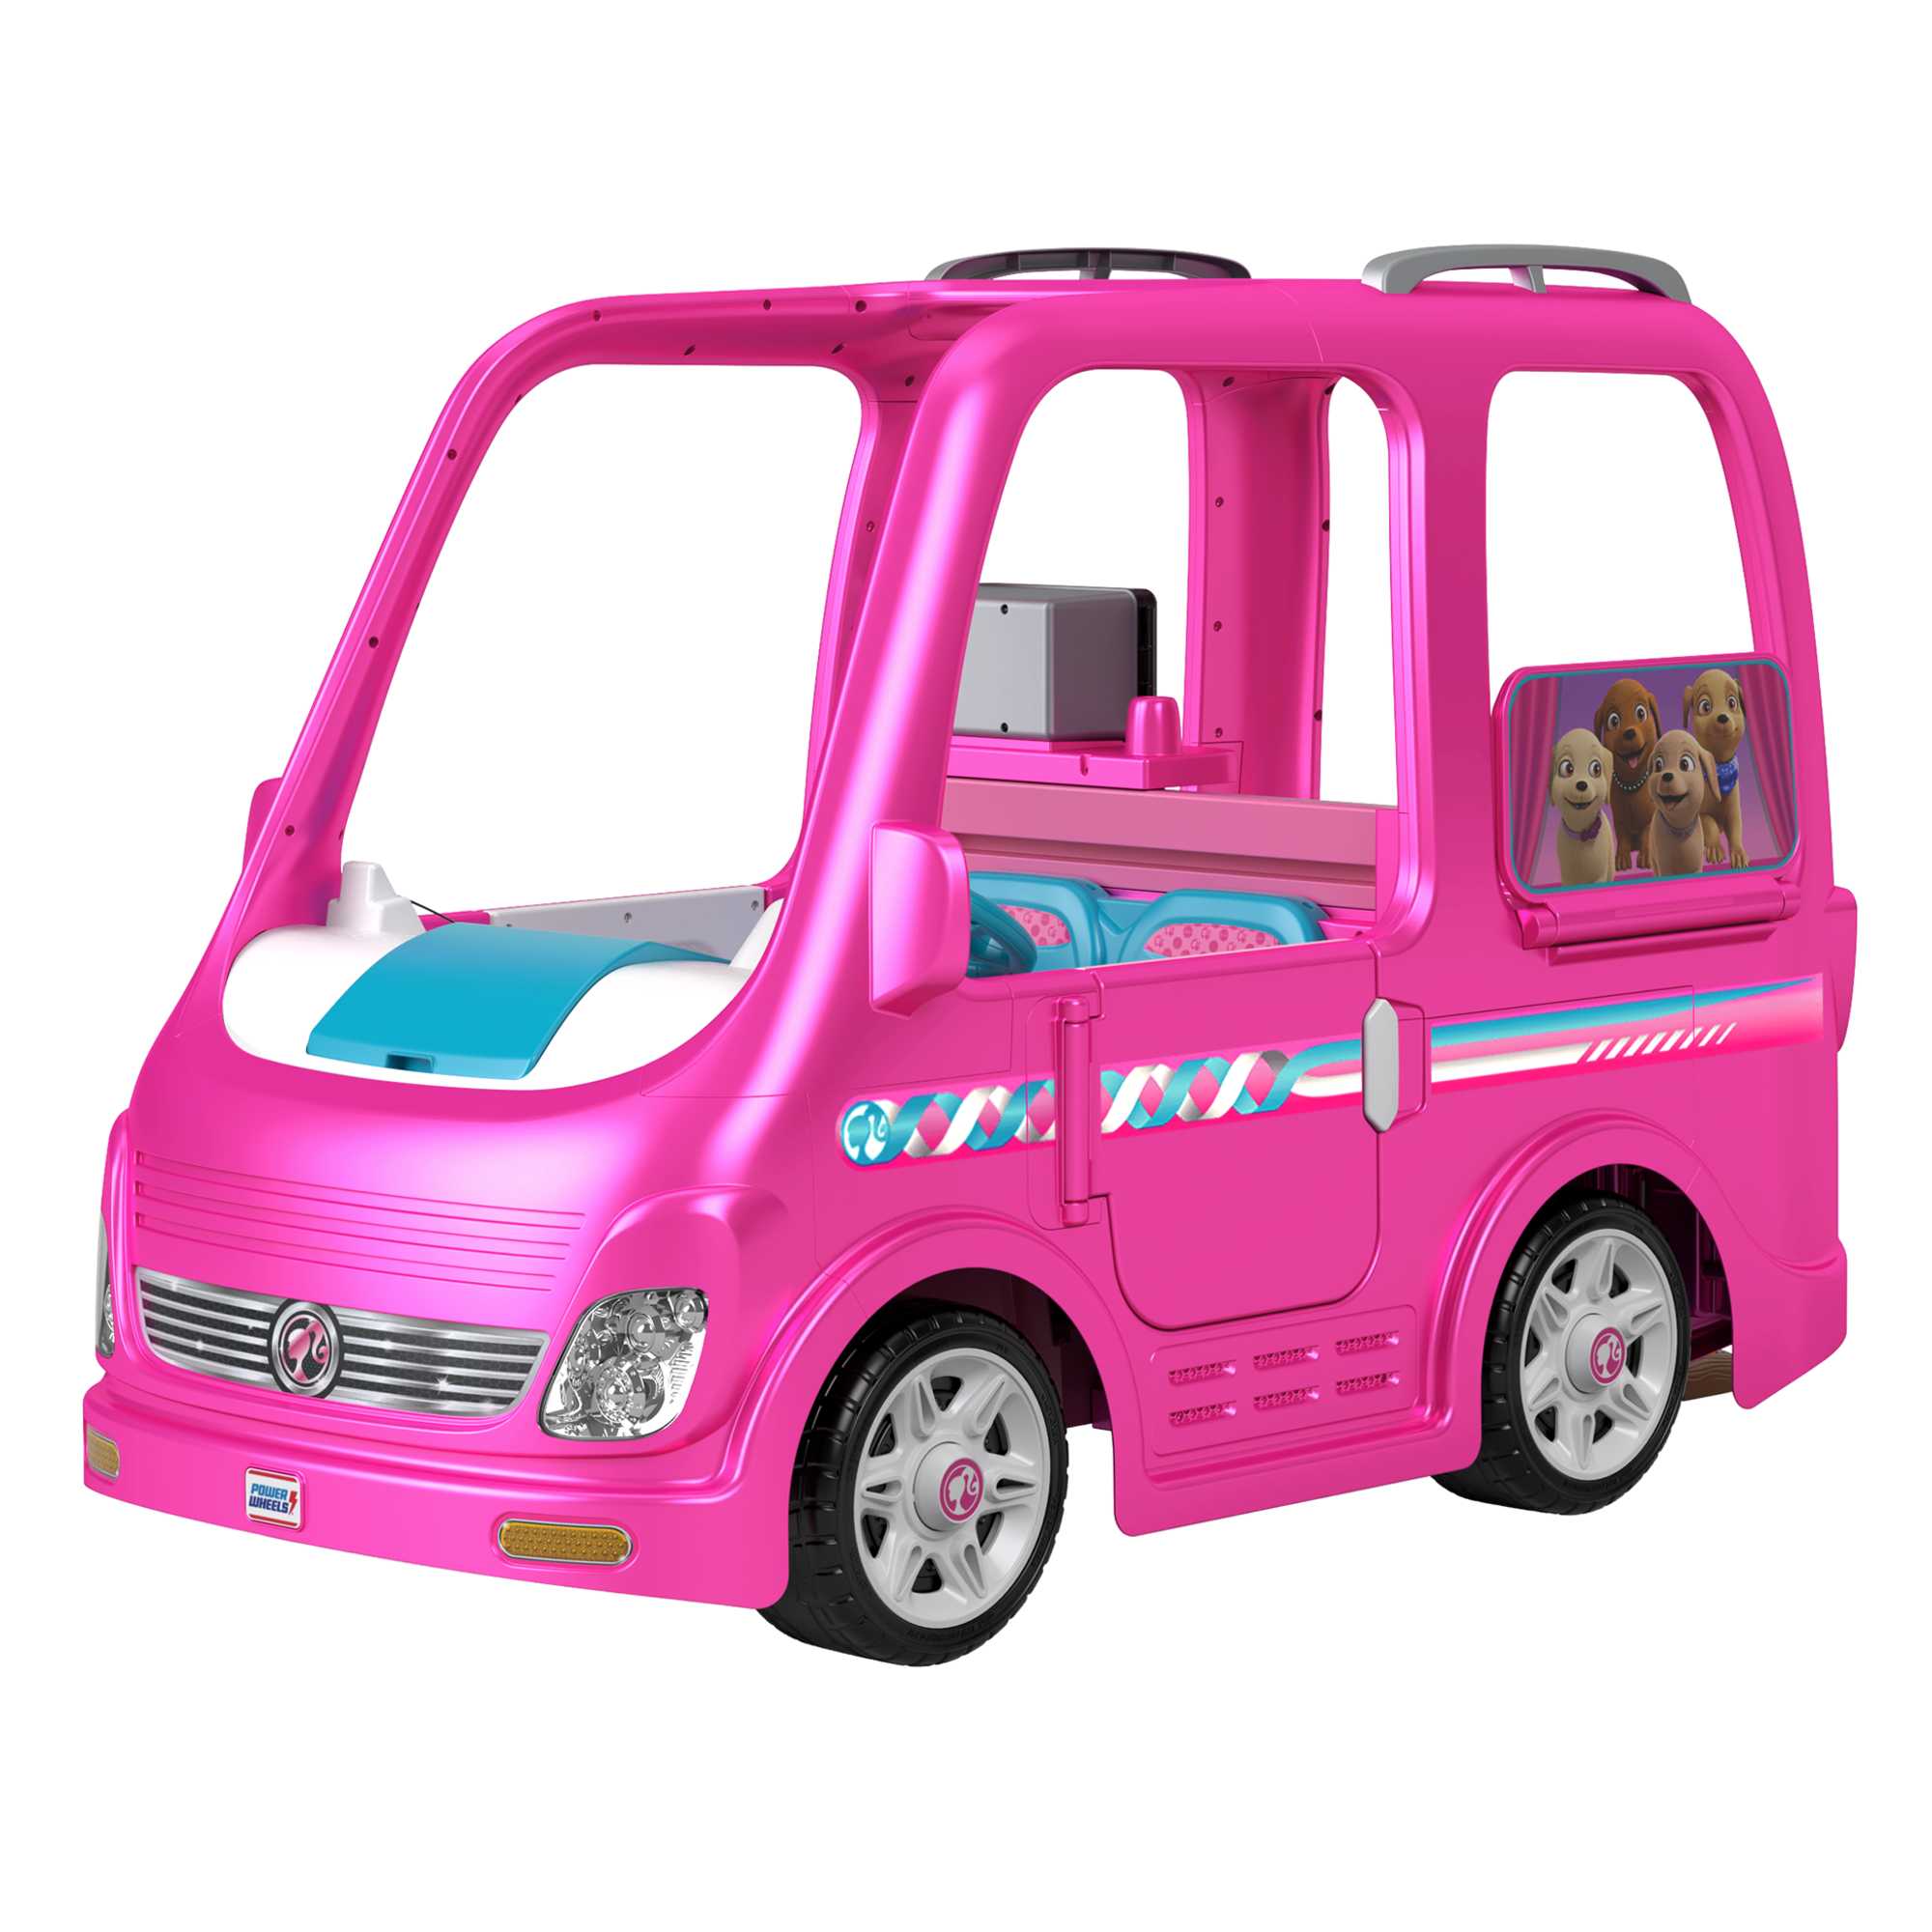 Barbie Dream Camper Vehicle Playset - The Toy Box Hanover